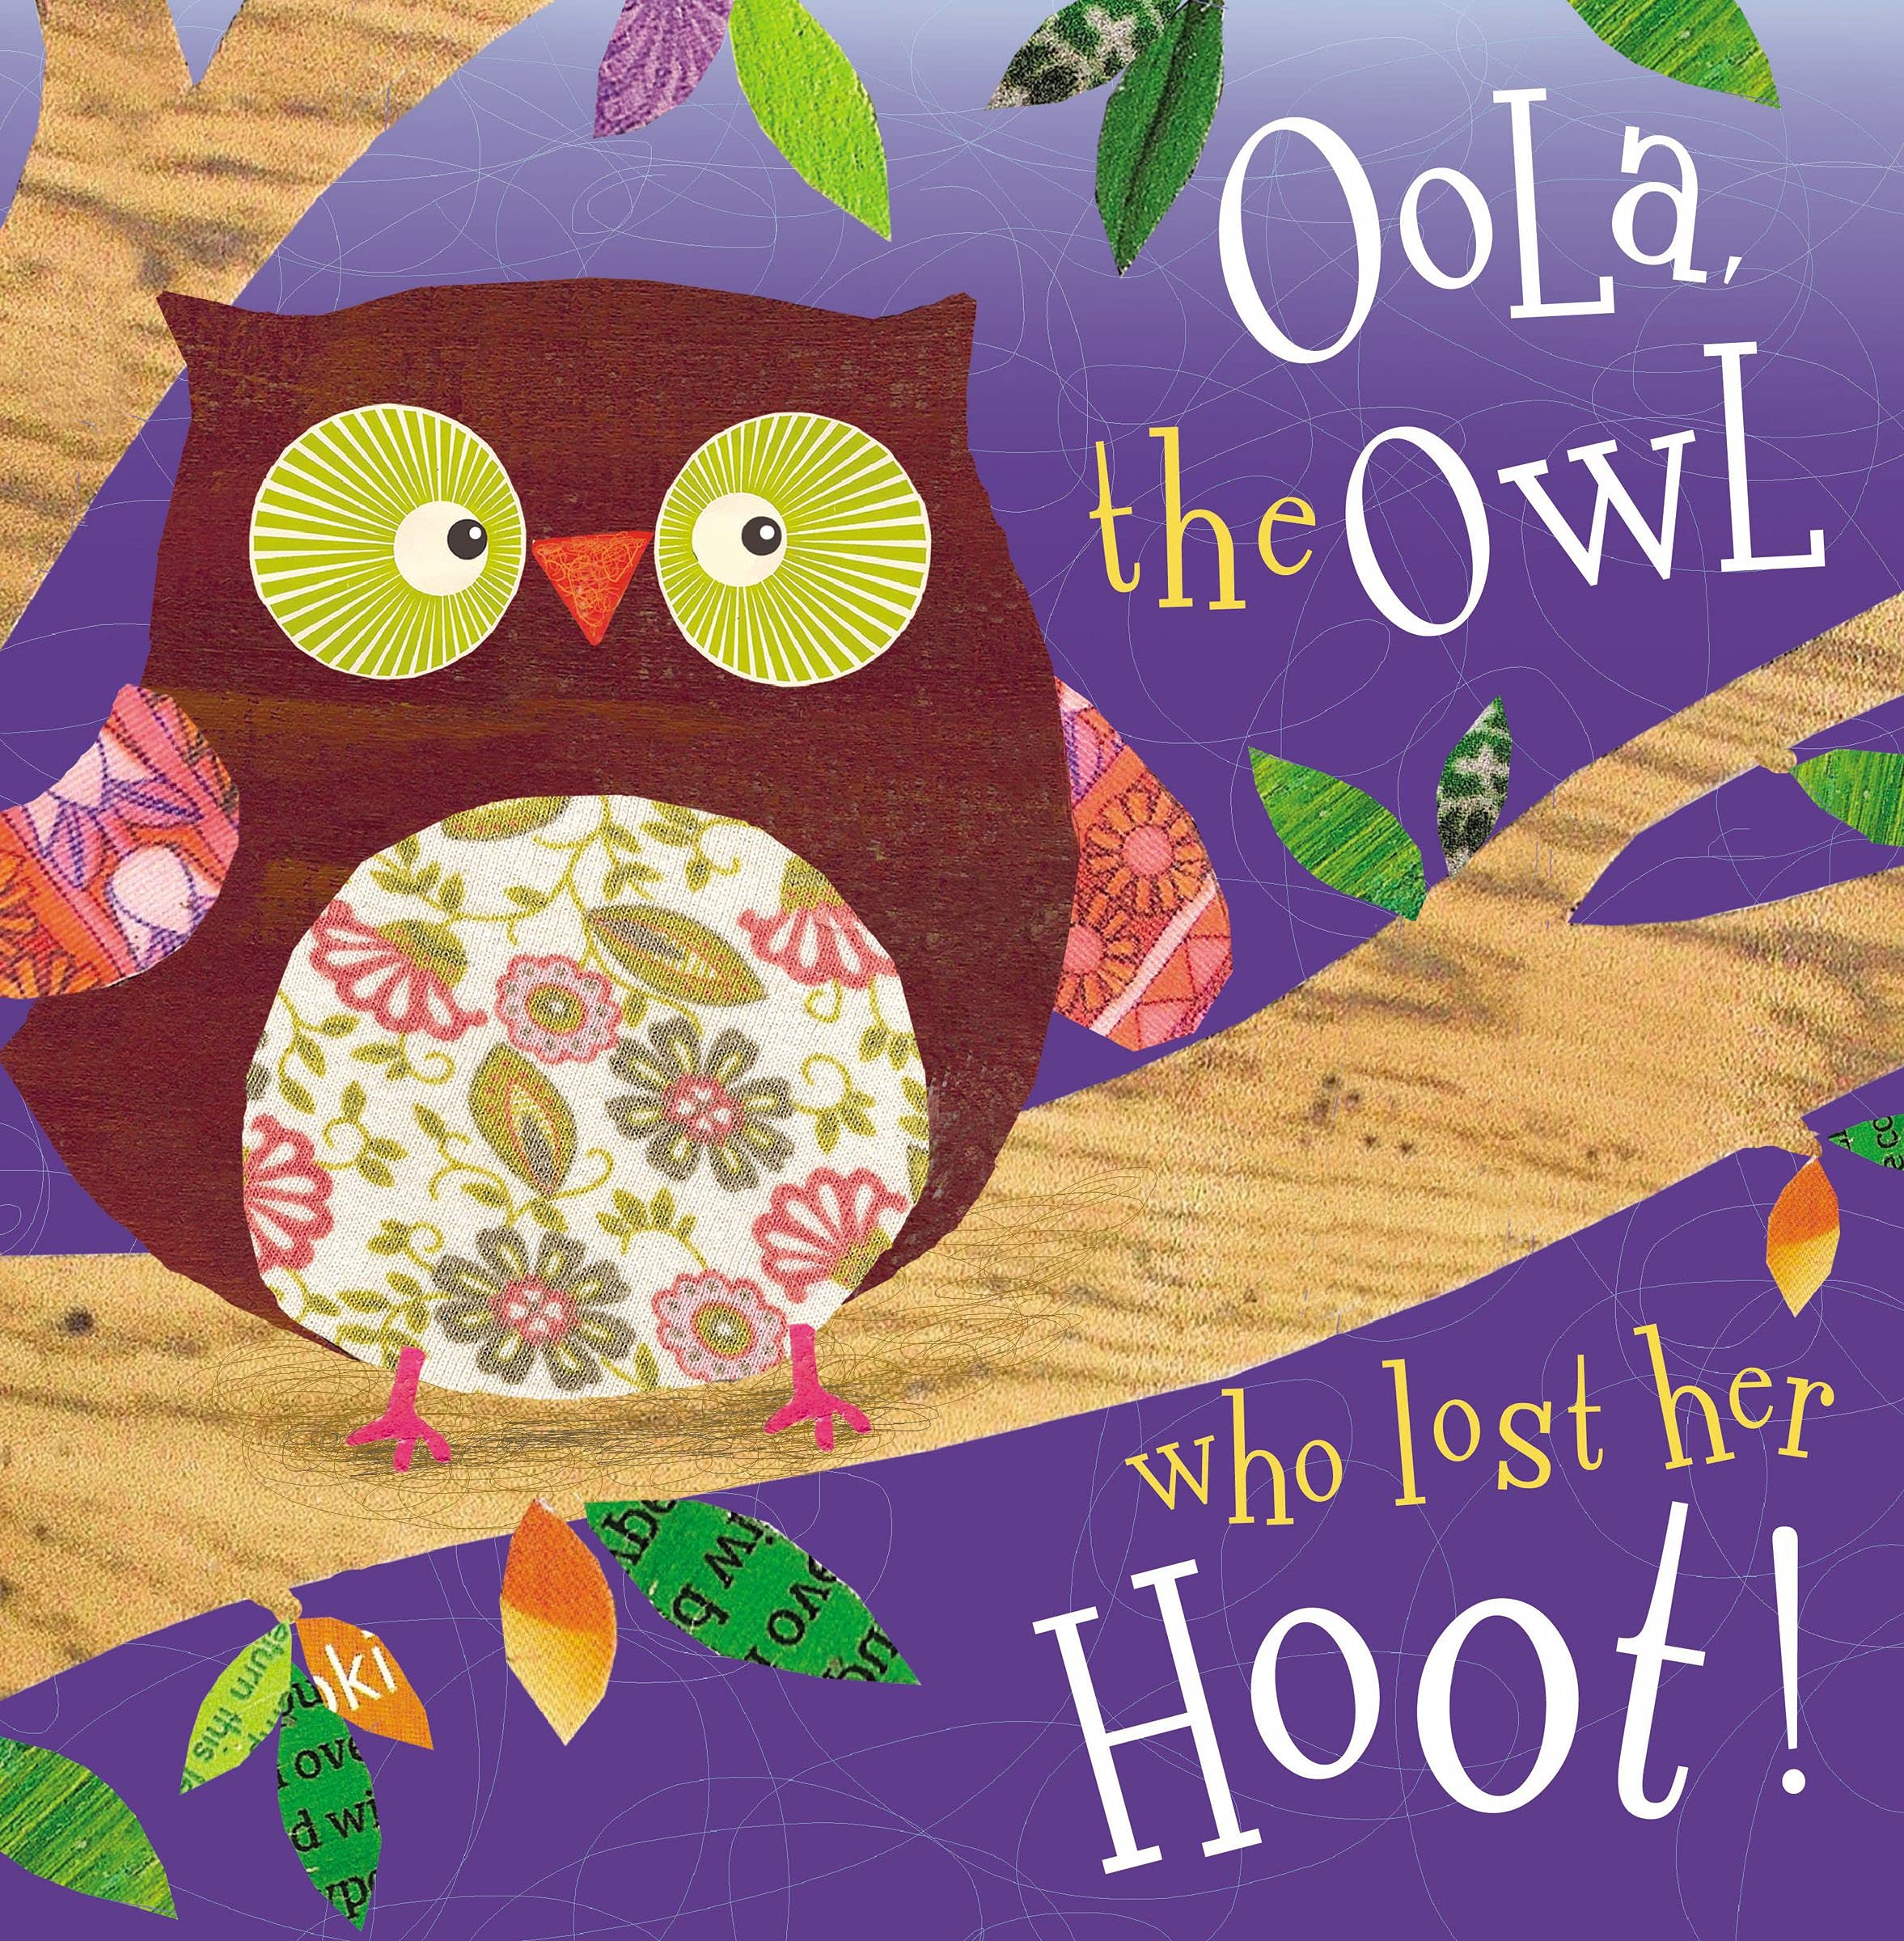 IMG : Oola, the owl who lost her hoot!